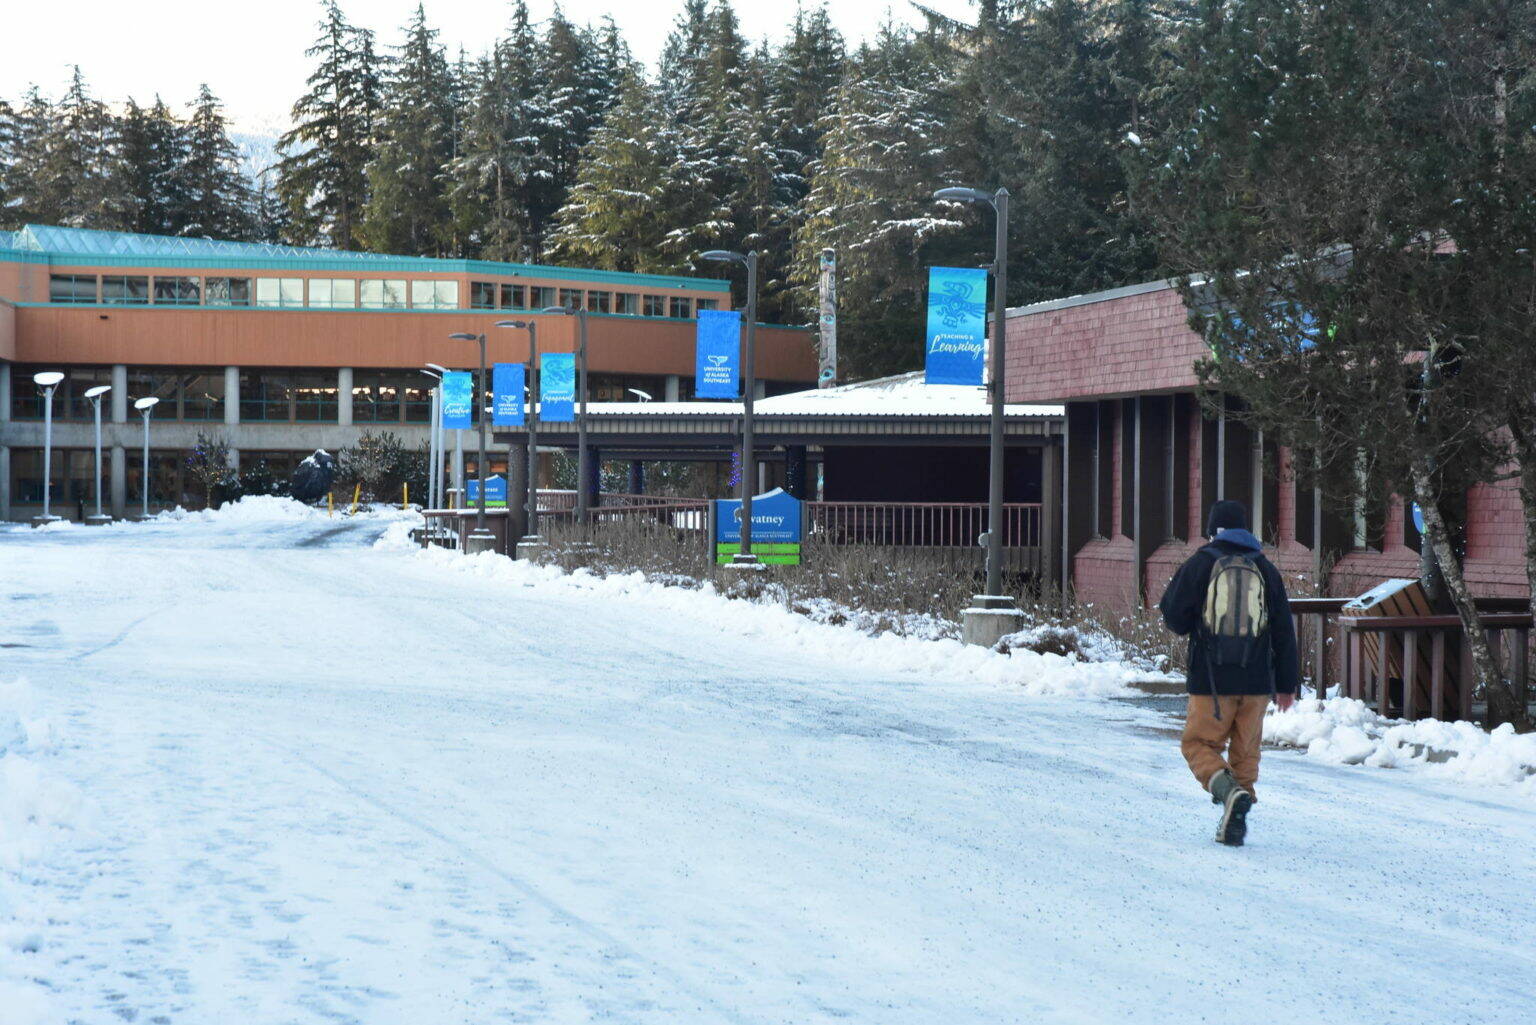 A student walks across the campus of the University of Alaska Southeast in this Feb. 4, 2021 file photo. An Anchorage Superior Court ruled Thursday against a group of UA students who had sued the state over funding for higher education scholarship programs. (Peter Segall / Juneau Empire file)